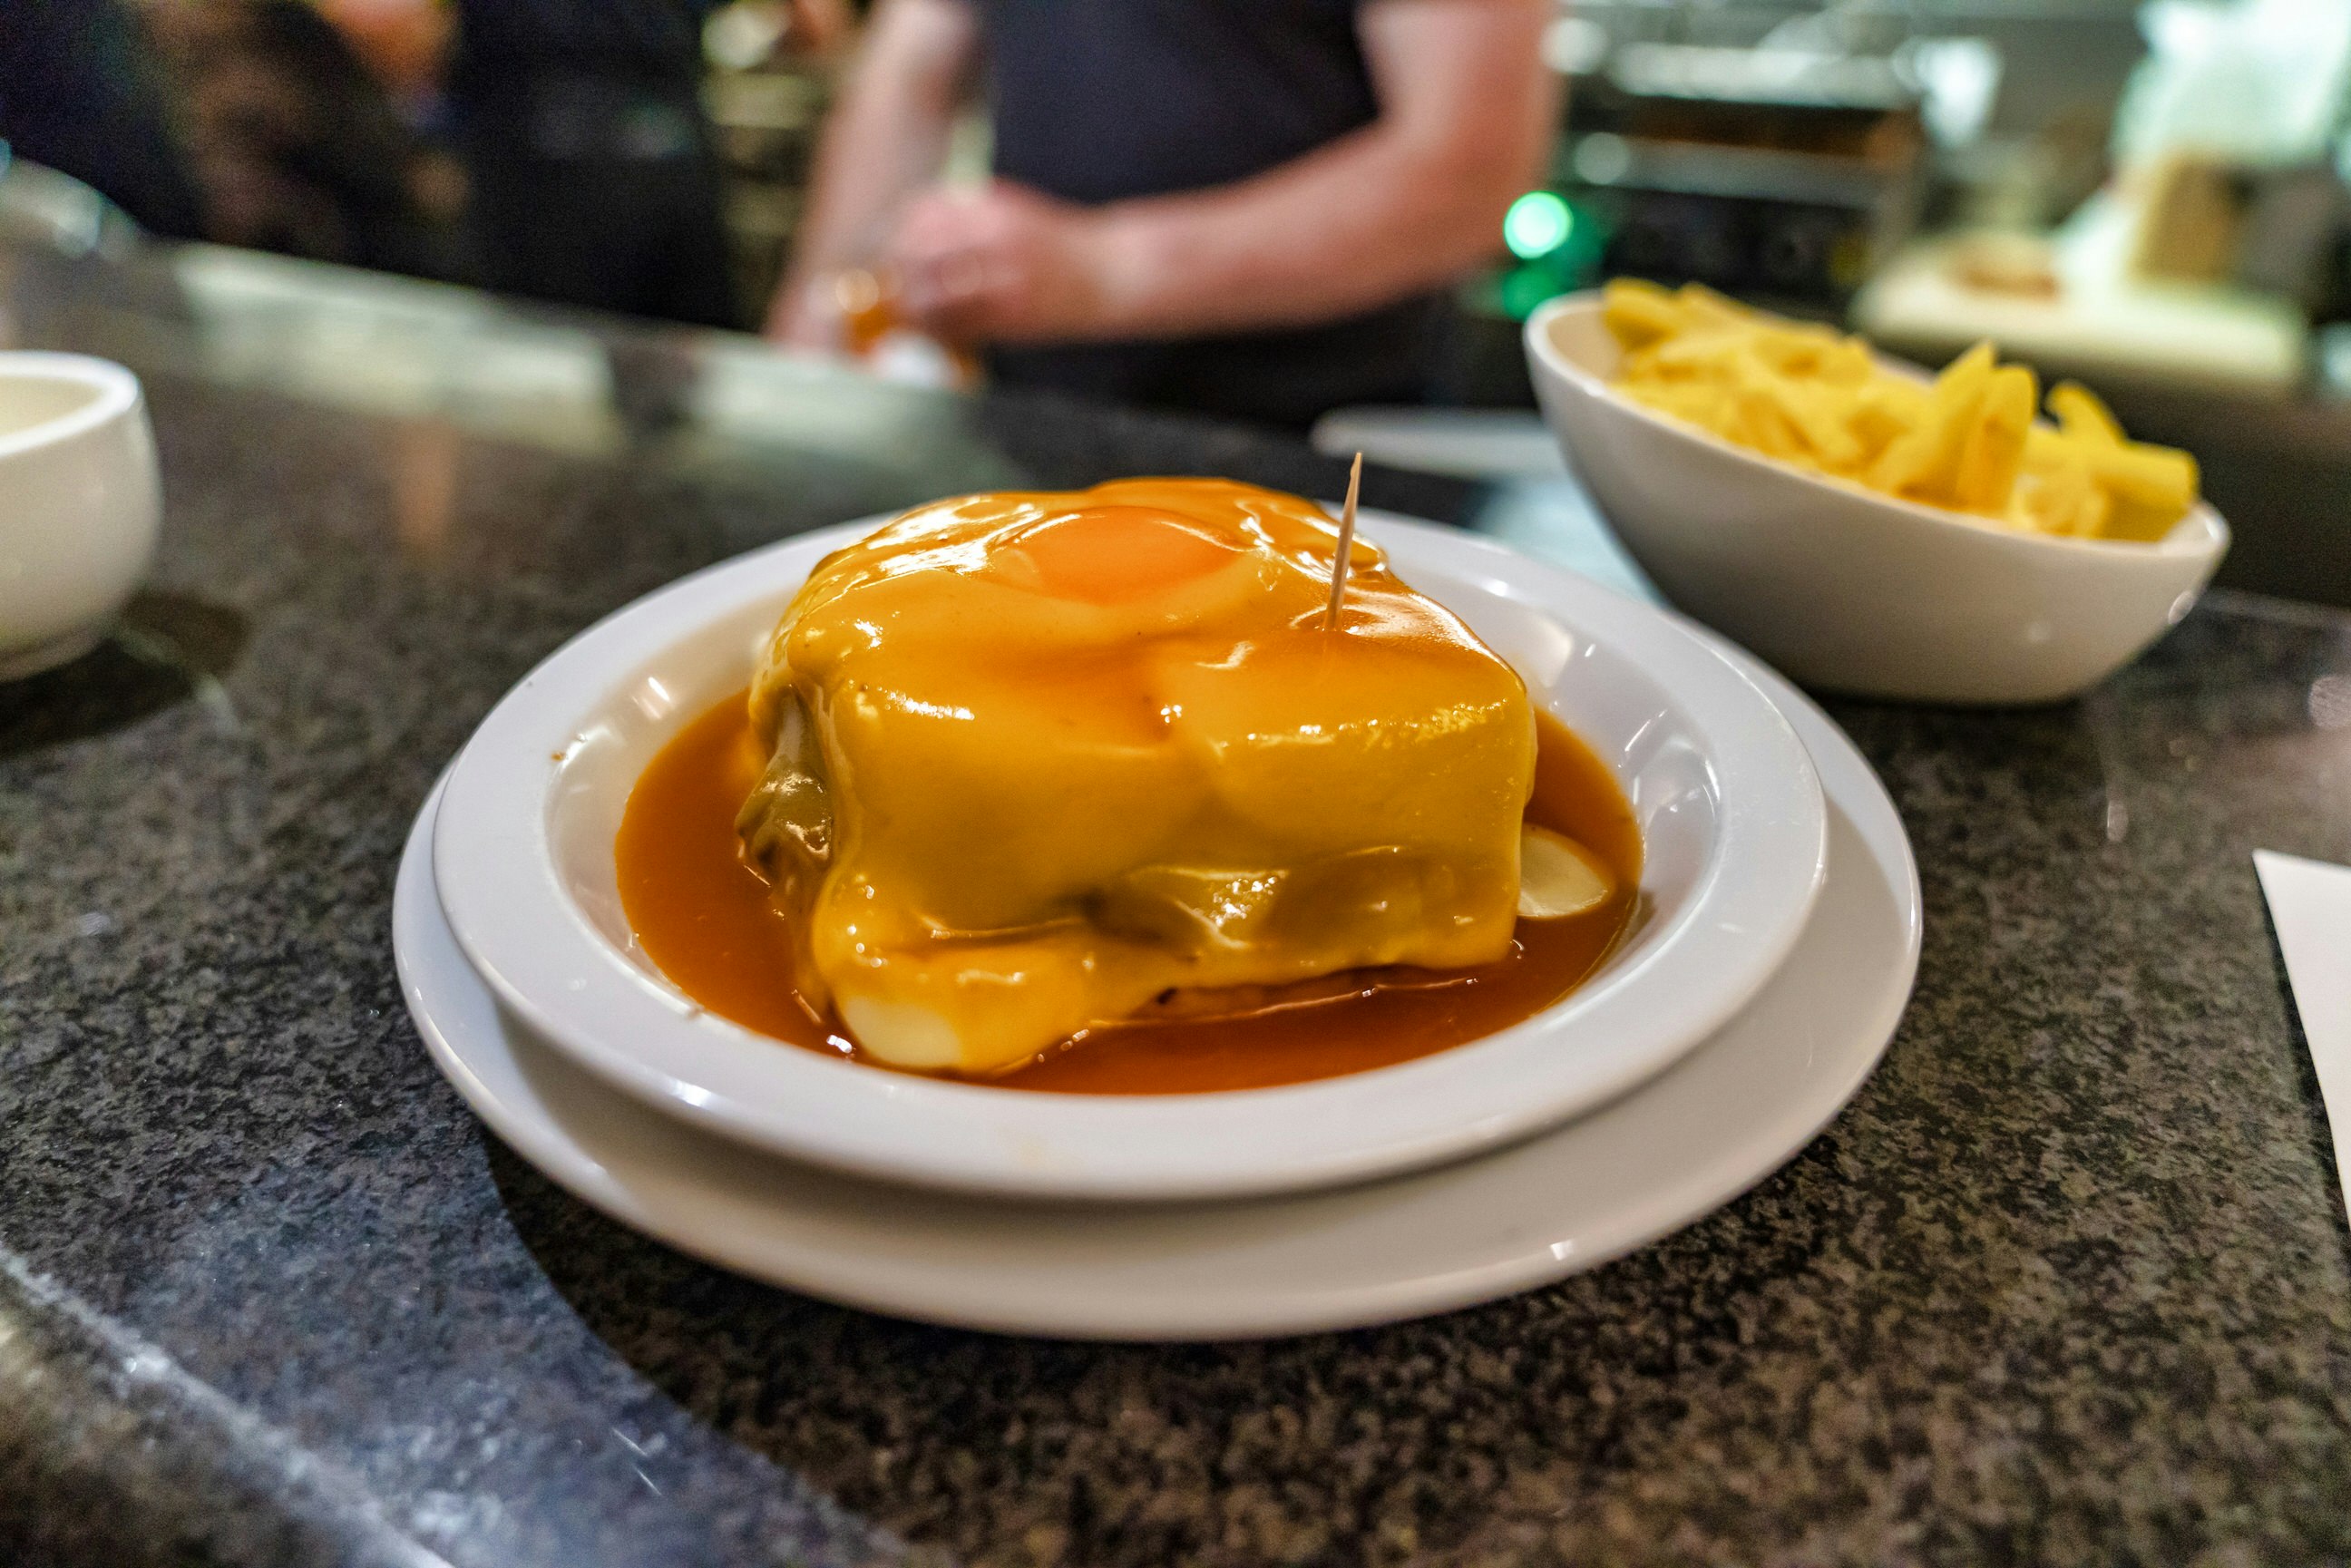 A francesinha in on a white plate, which sits on top of a bar. It's smothered with sauce and behind it sits a bowl of fries. A member of staff is out of focus, behind the bar.